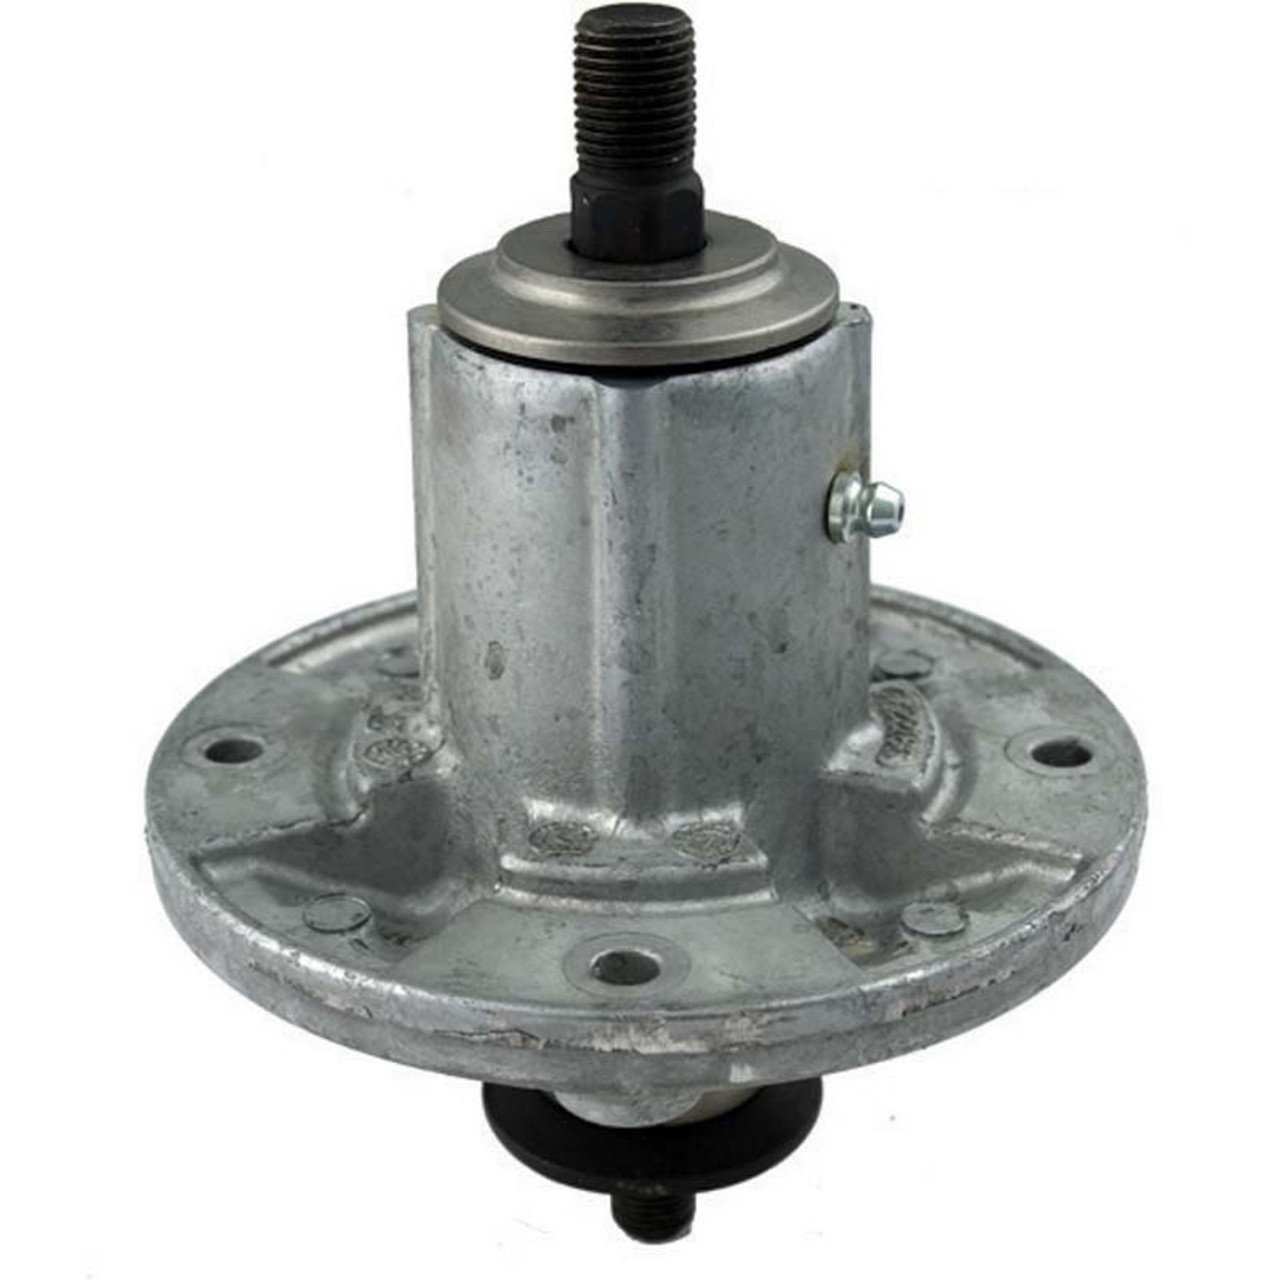 Oregon Replacement Spindle, John Deere Part Number 82-358 | Griggs Lawn ...